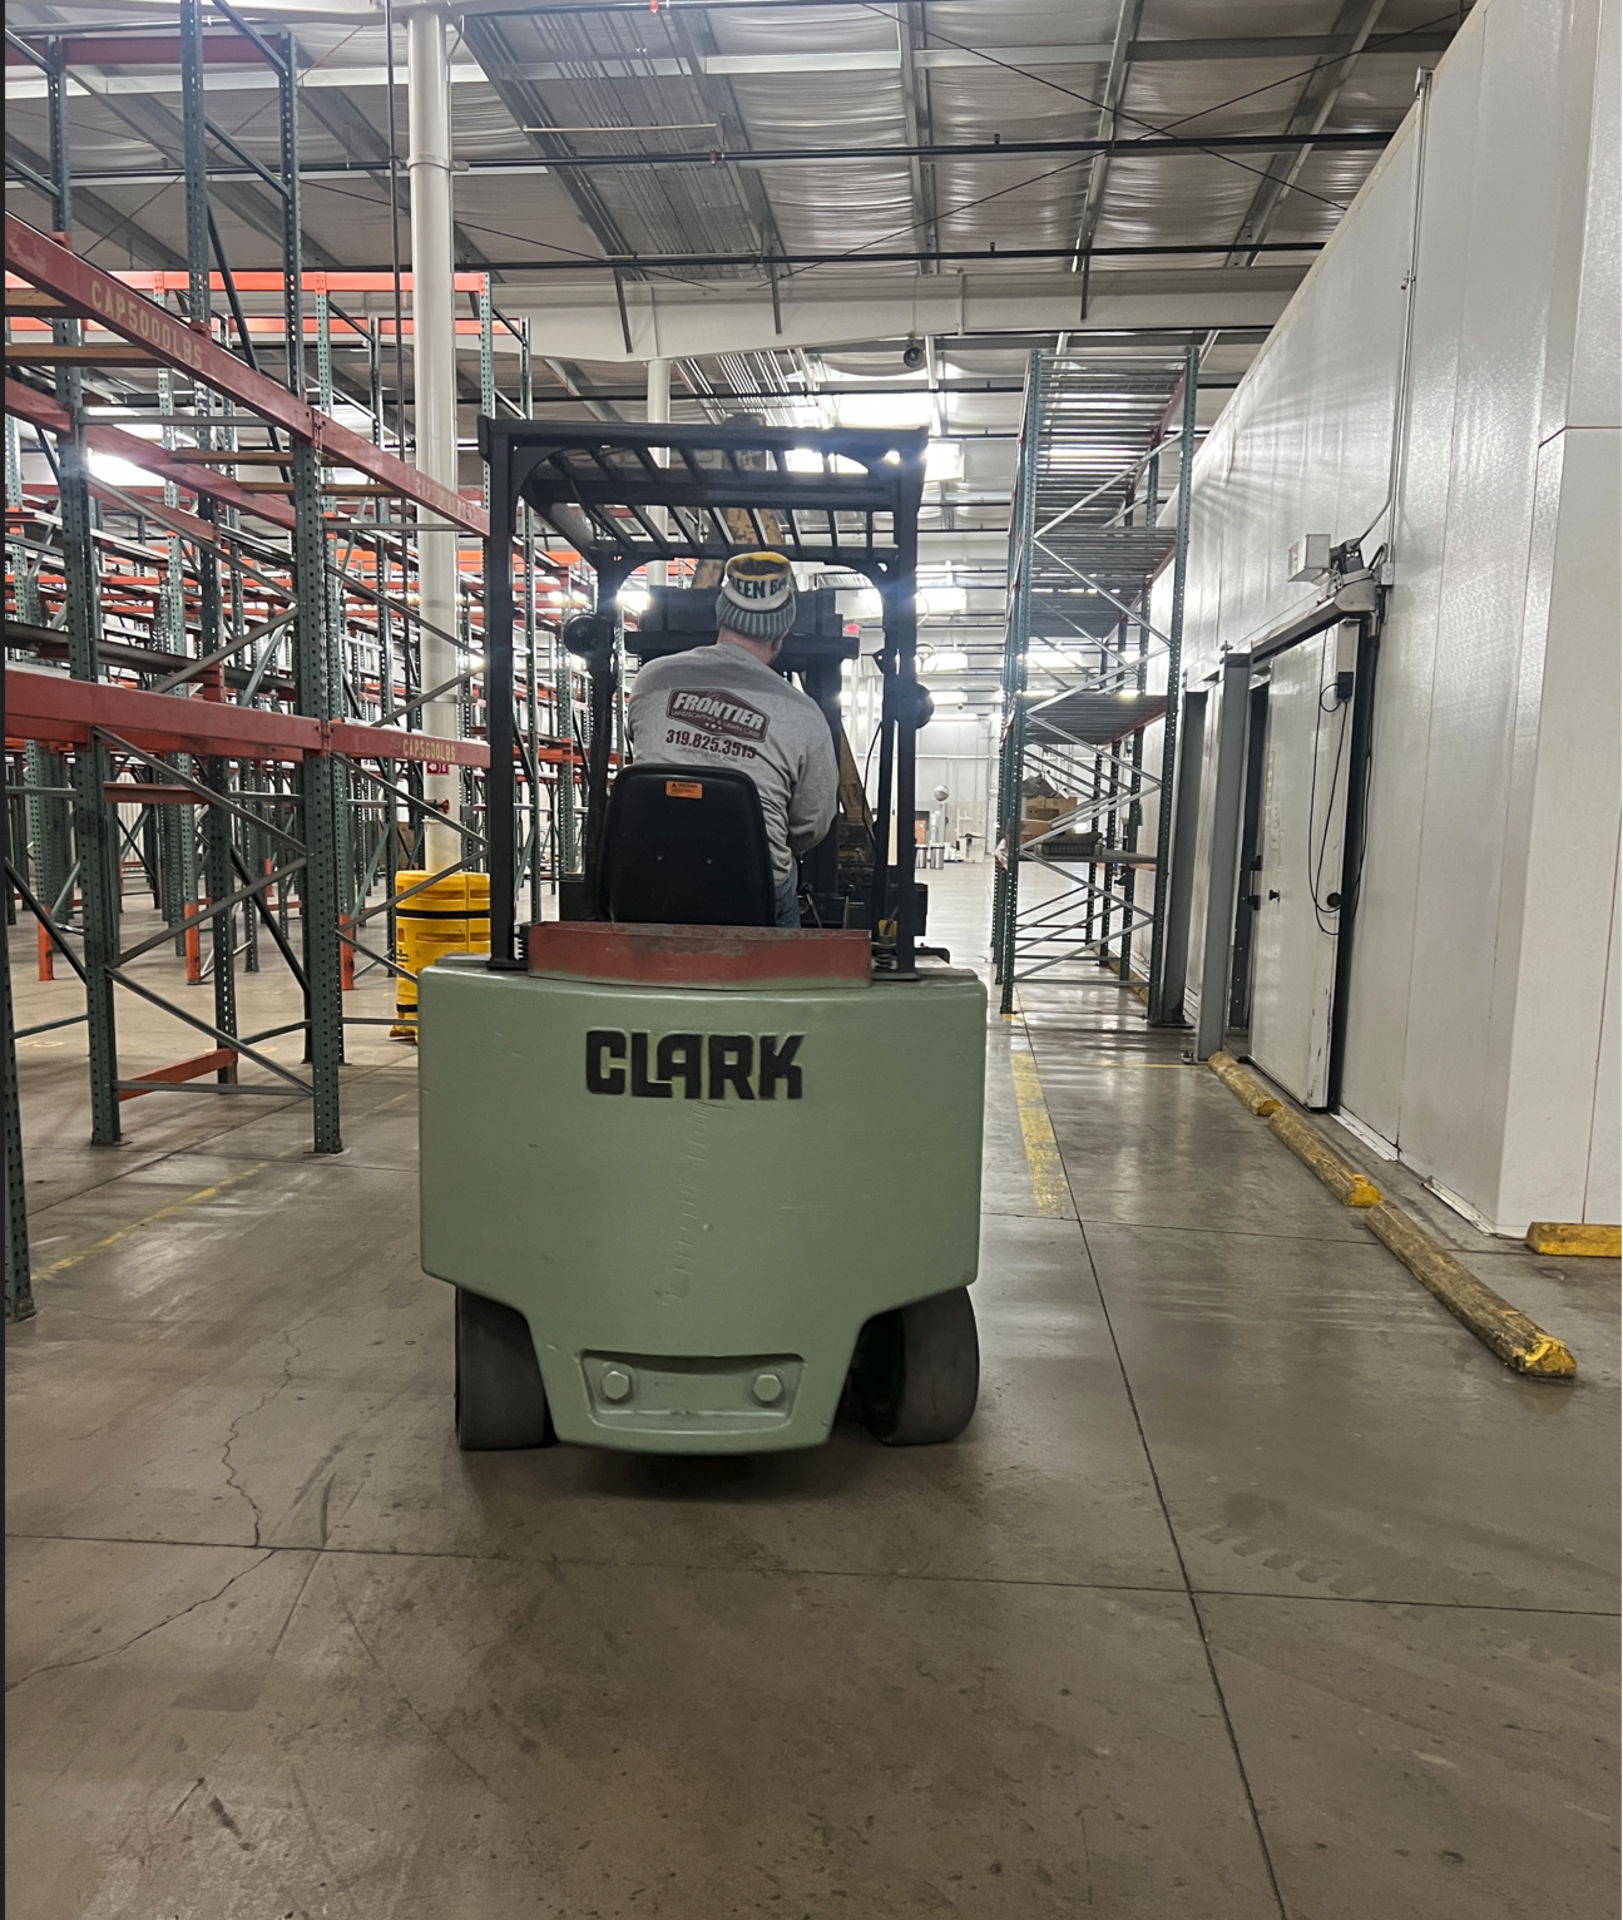 Clark 11,850 LB Capacity Sit-Down Electric Forklift, Model: EC500-120, S/N: E9120-0085-6890FB with - Image 6 of 16